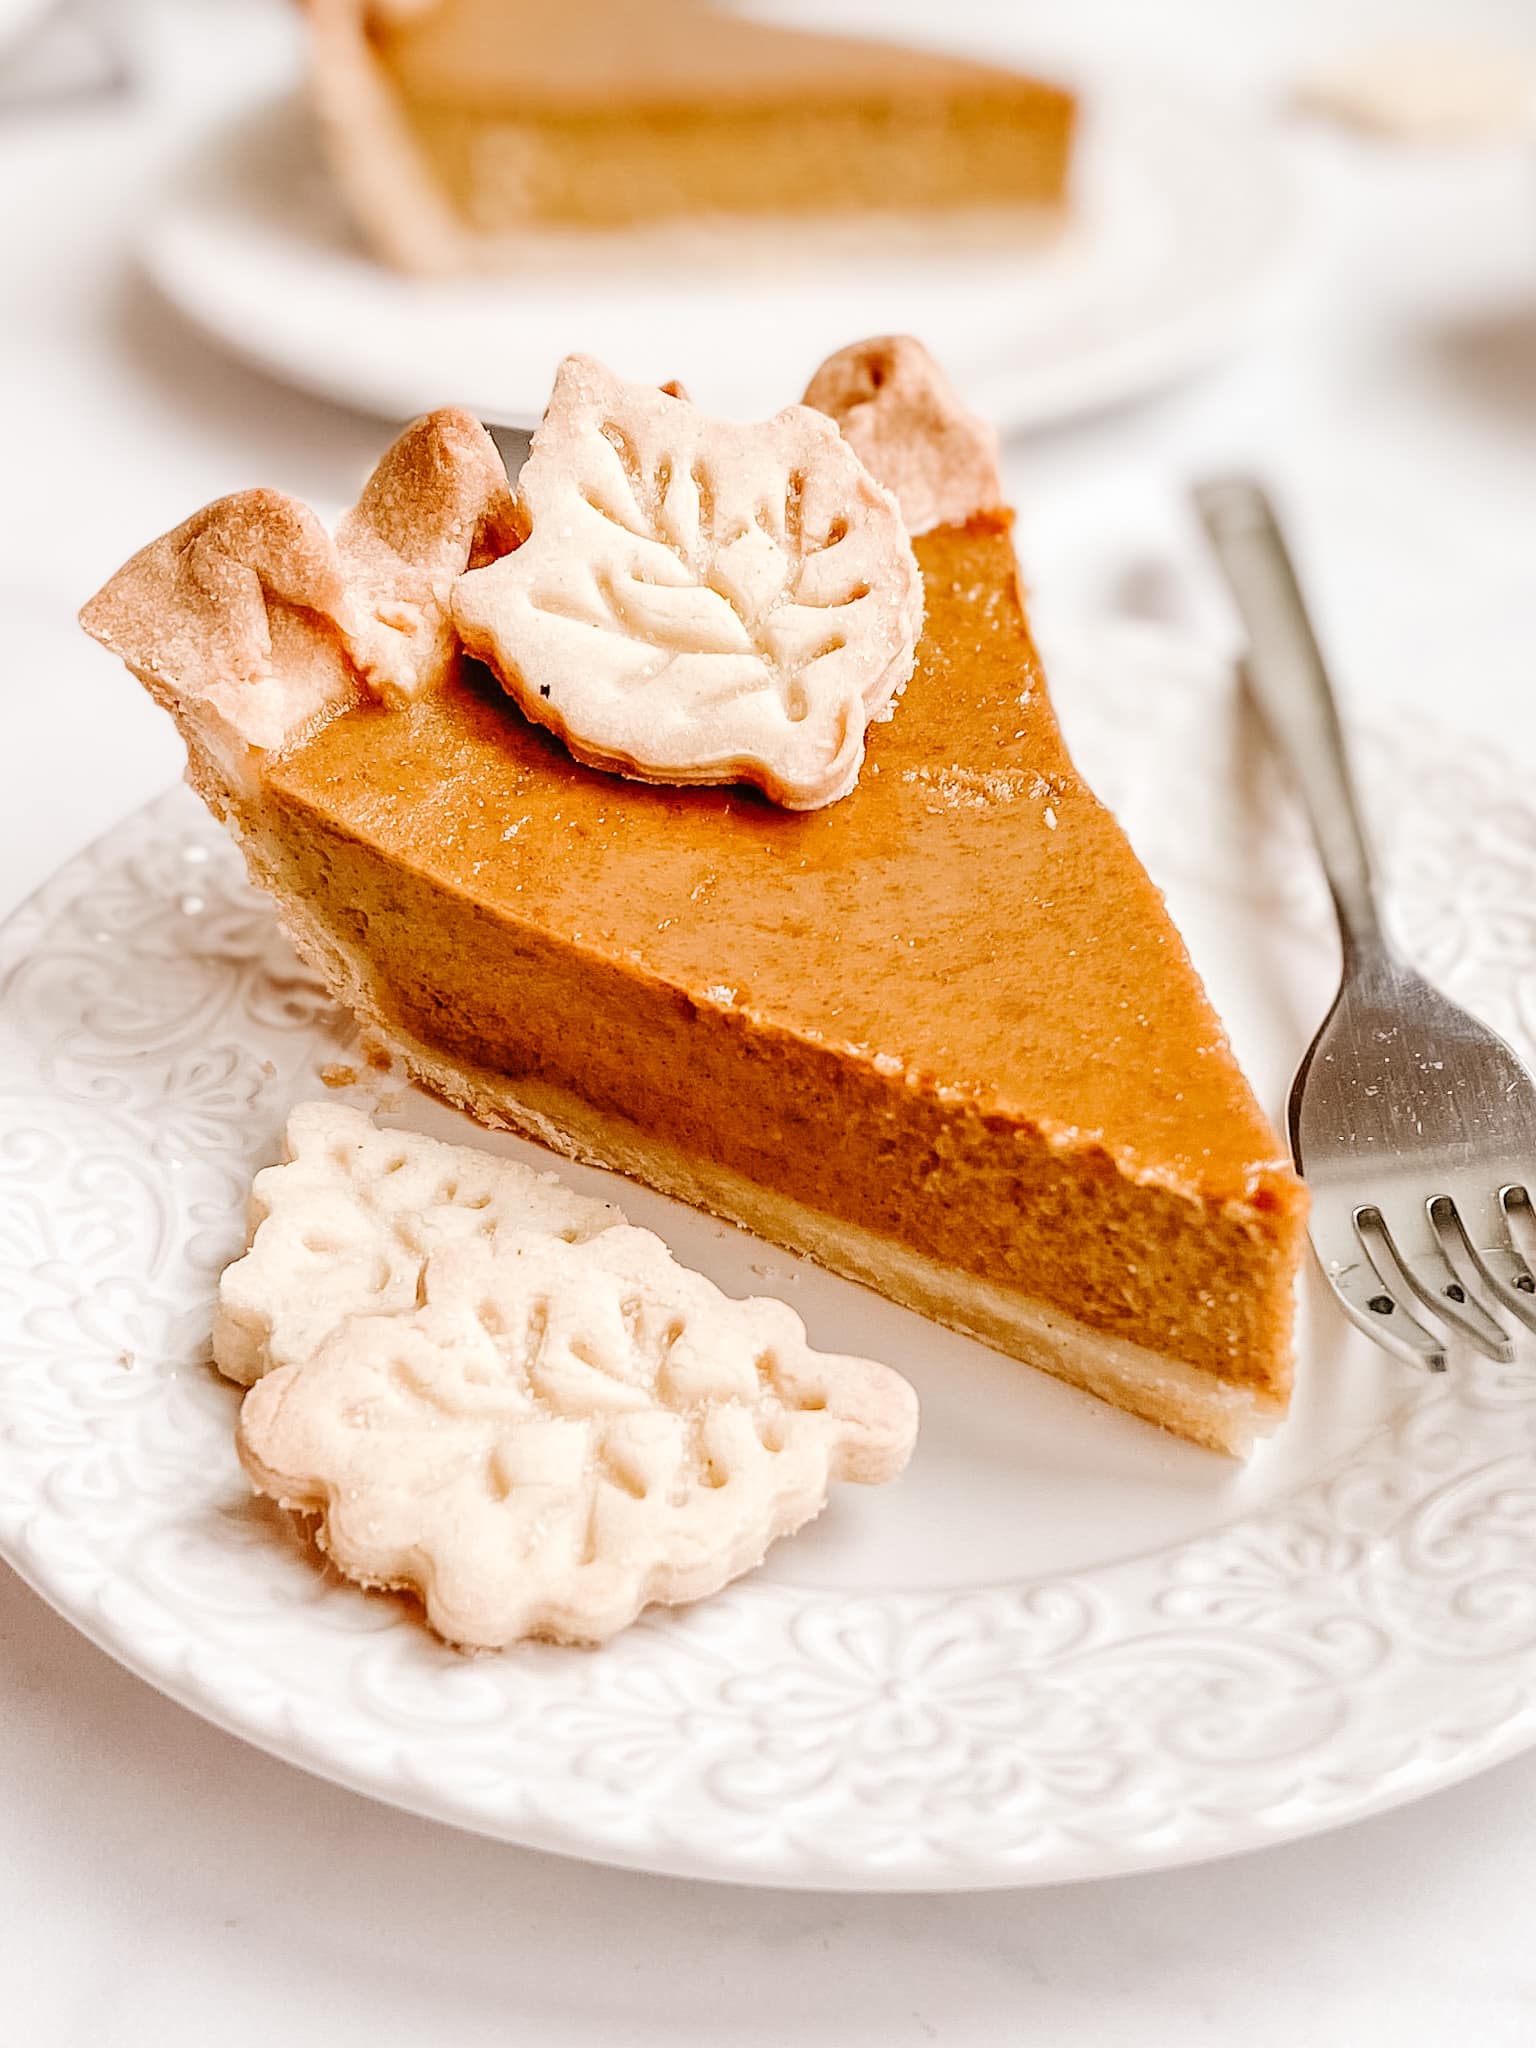 slice of pumpkin pie on lattice decorative white plate with silver fork and pastry leaves 